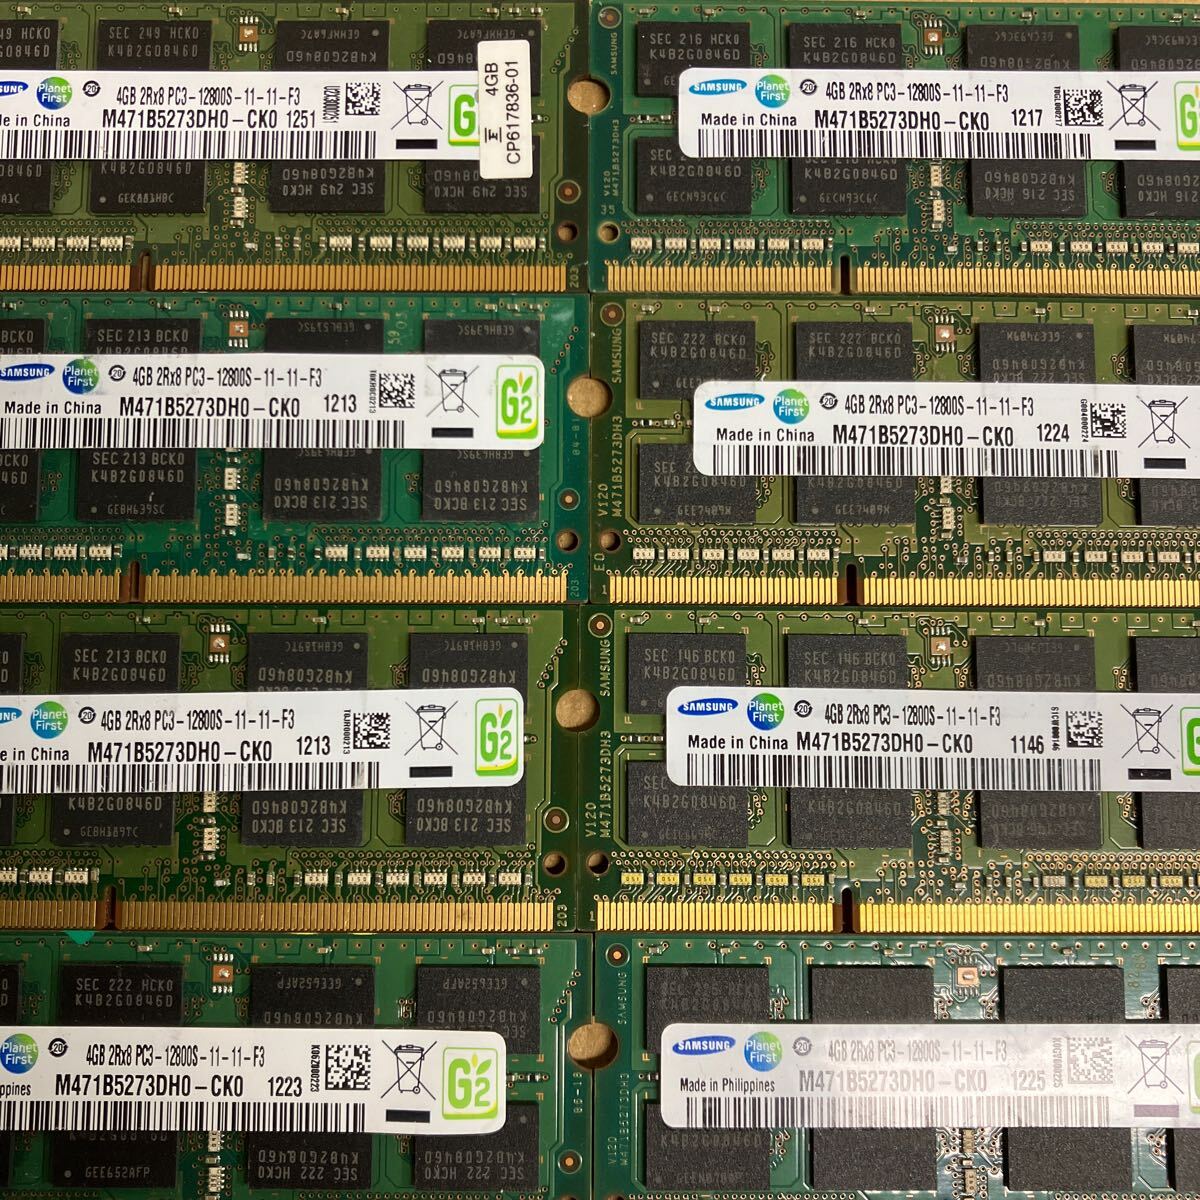 K110 SAMSUNG Note PC memory 4GB 2Rx8 PC3-12800S 15 sheets 